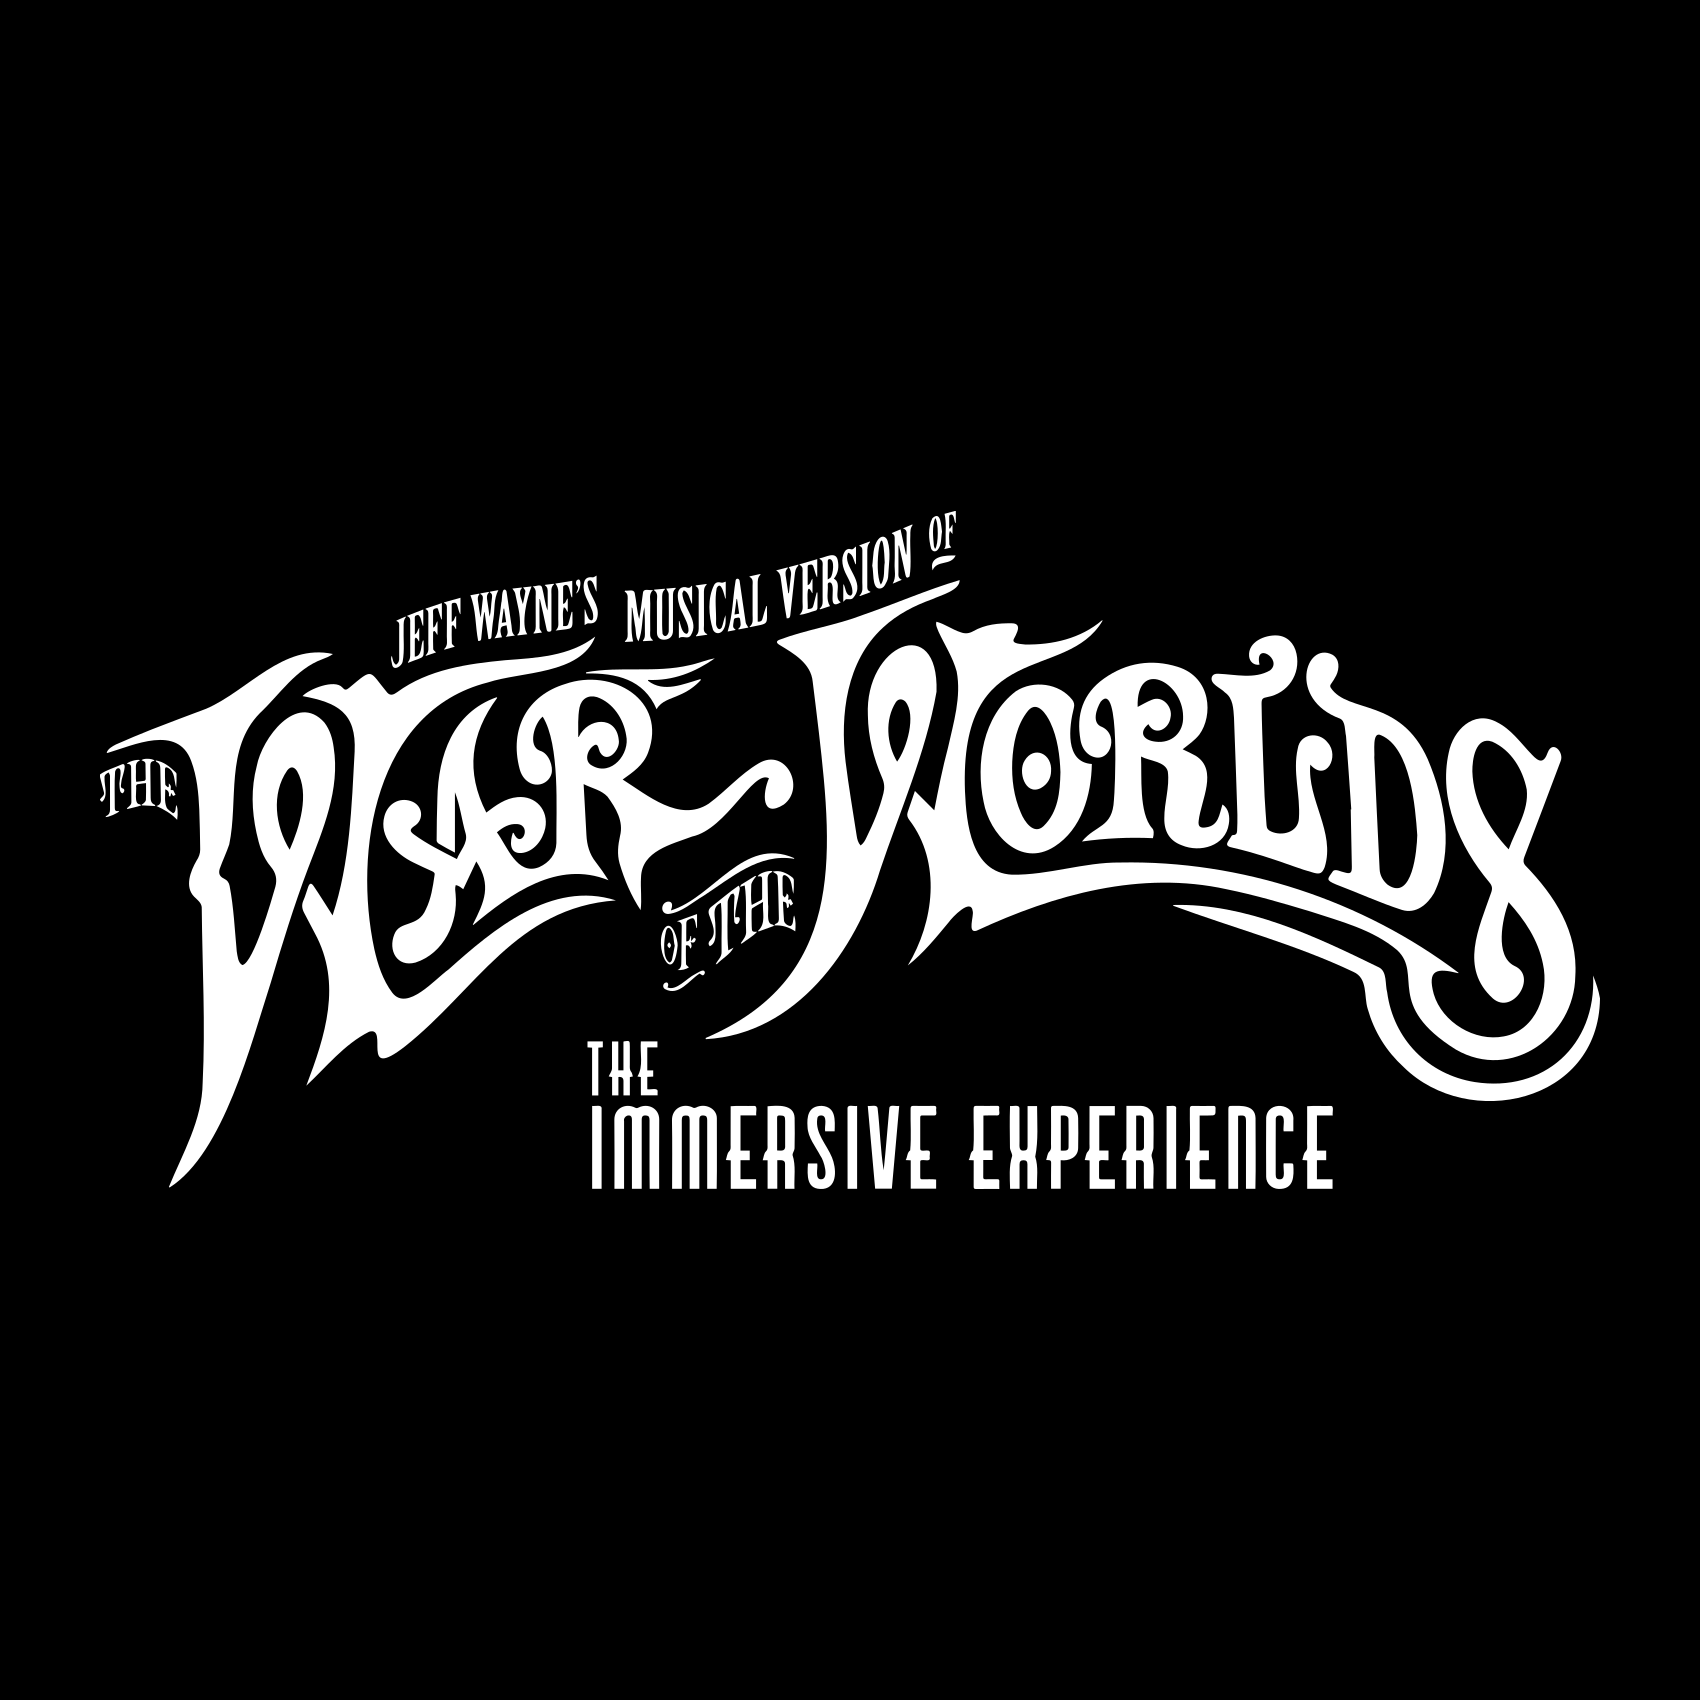 War of The Worlds Coupons & Promo Codes